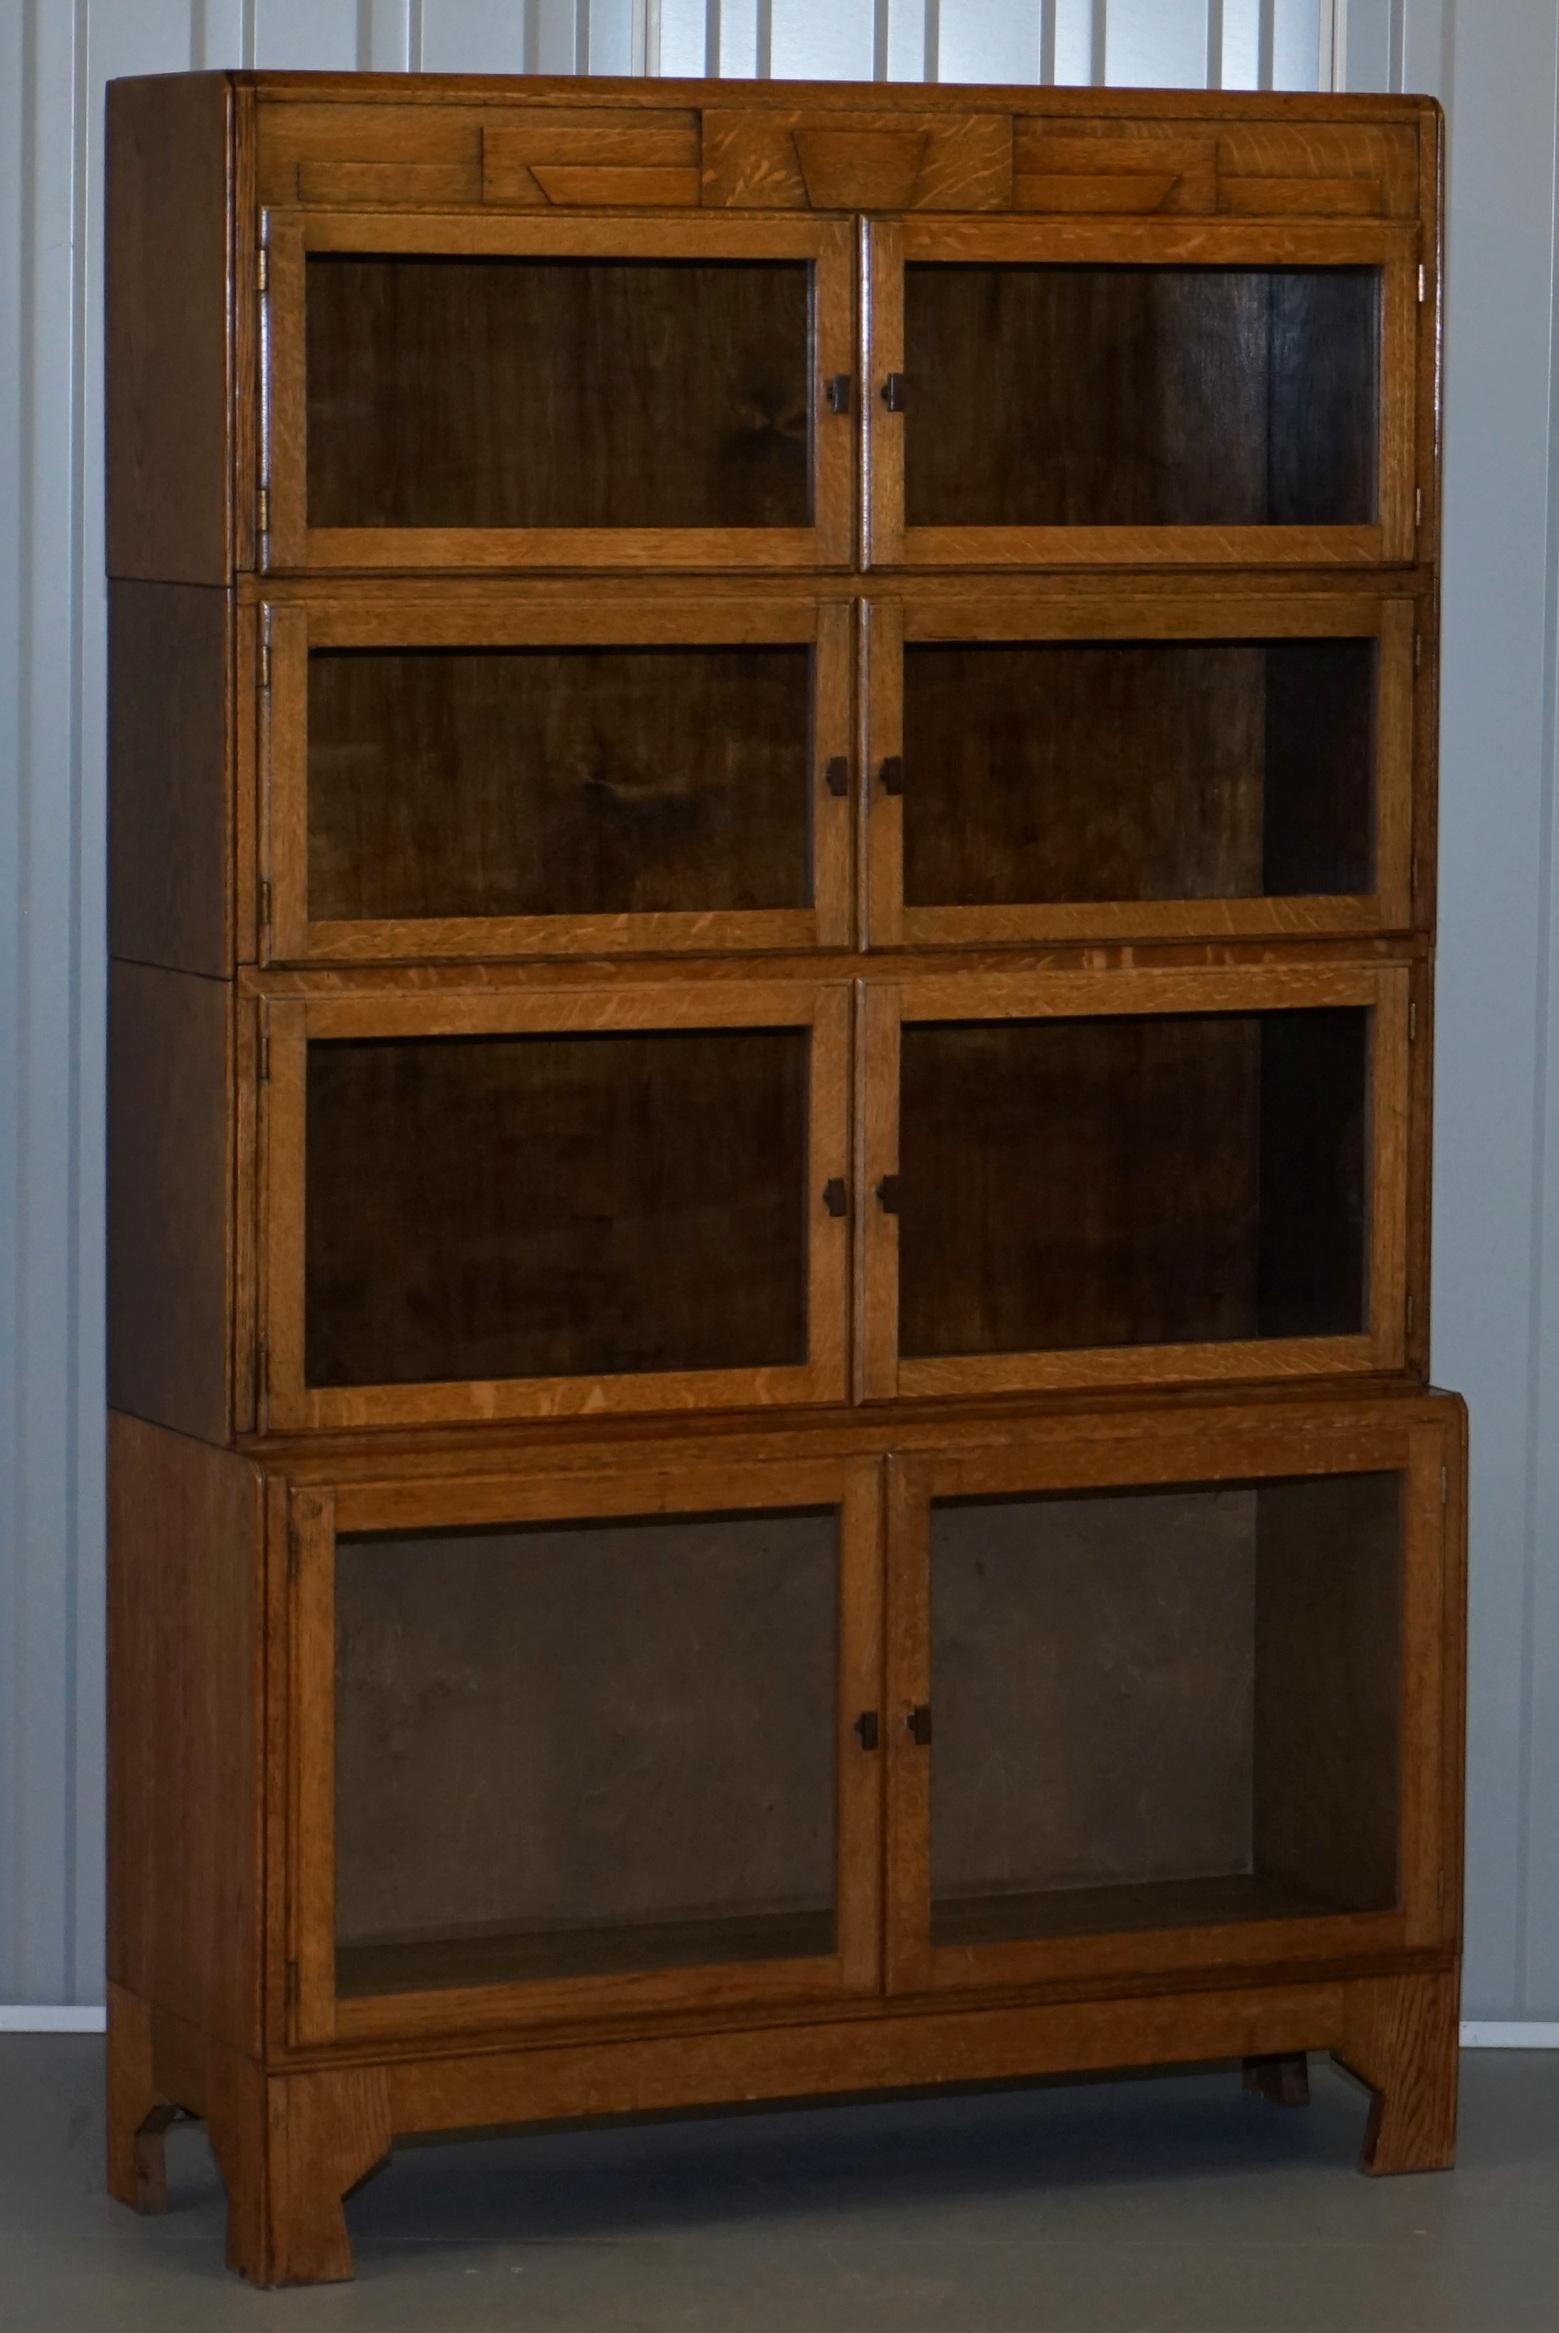 We are delighted to offer for sale this lovely pair of early circa 1920 Minty oxford stacking legal bookcases in solid oak made in the Art Deco style

A very good looking and well-made pair, there were a number of companies making this type of